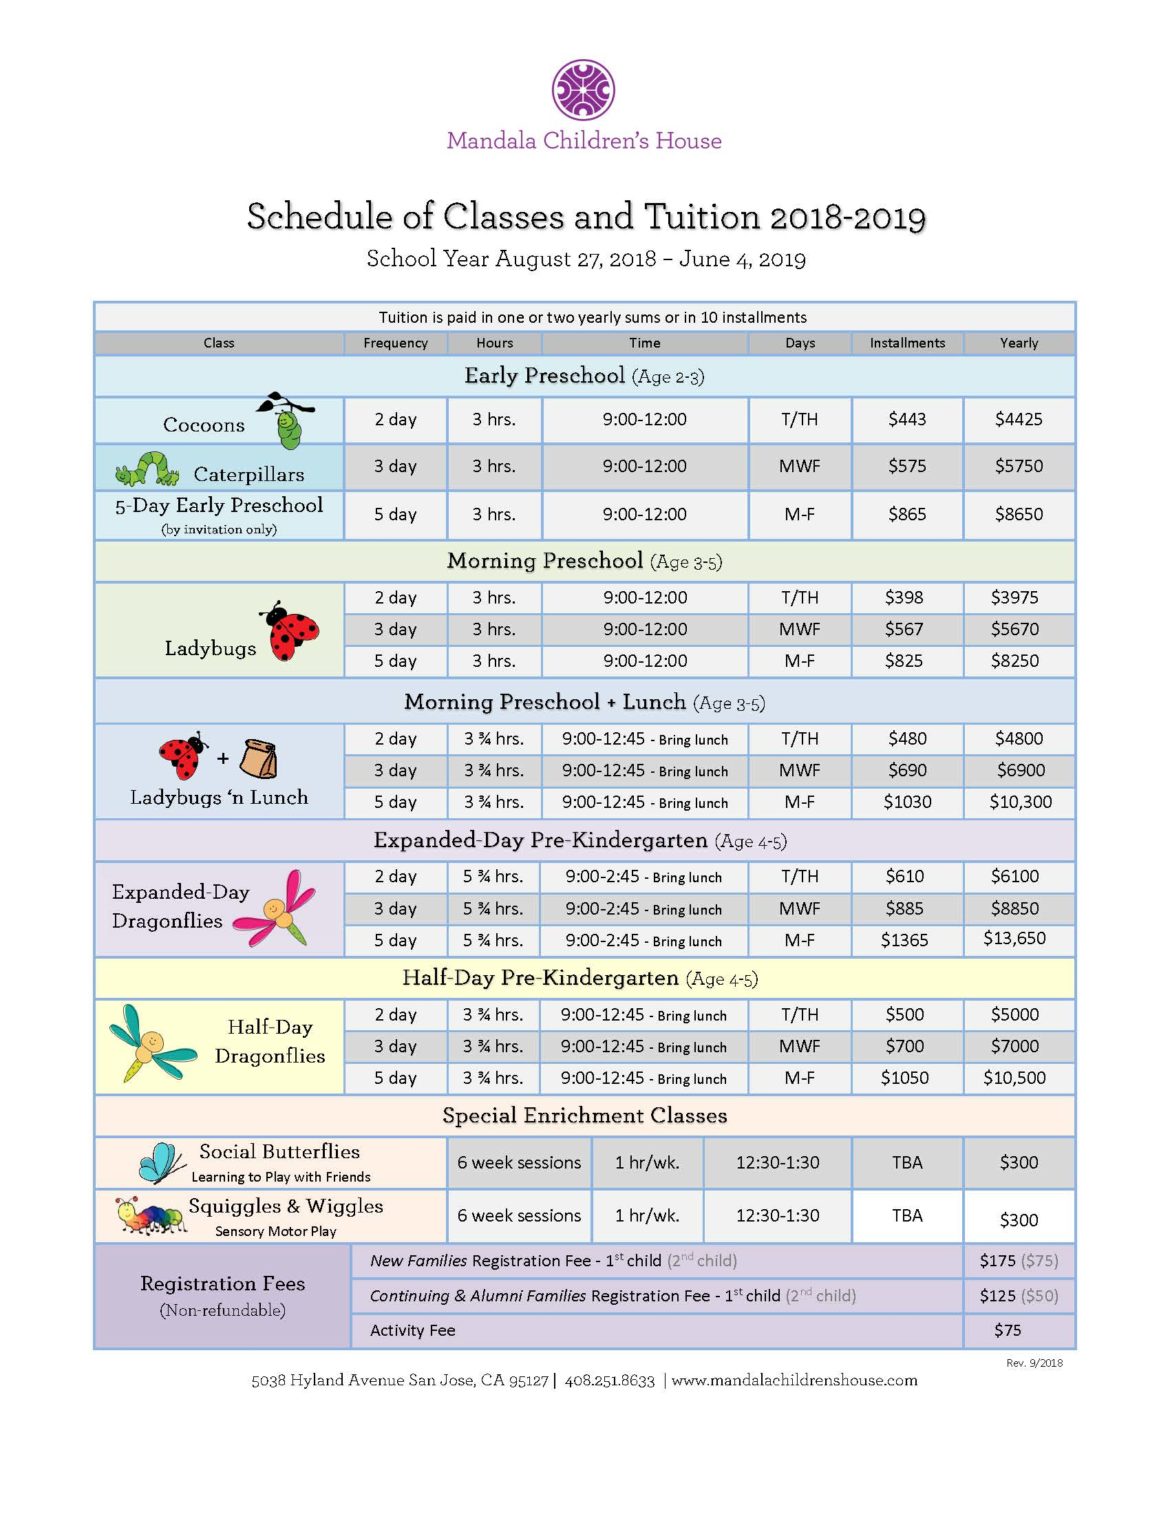 Schedule-of-Classes-Tuition-2018-19-revised-website.jpg